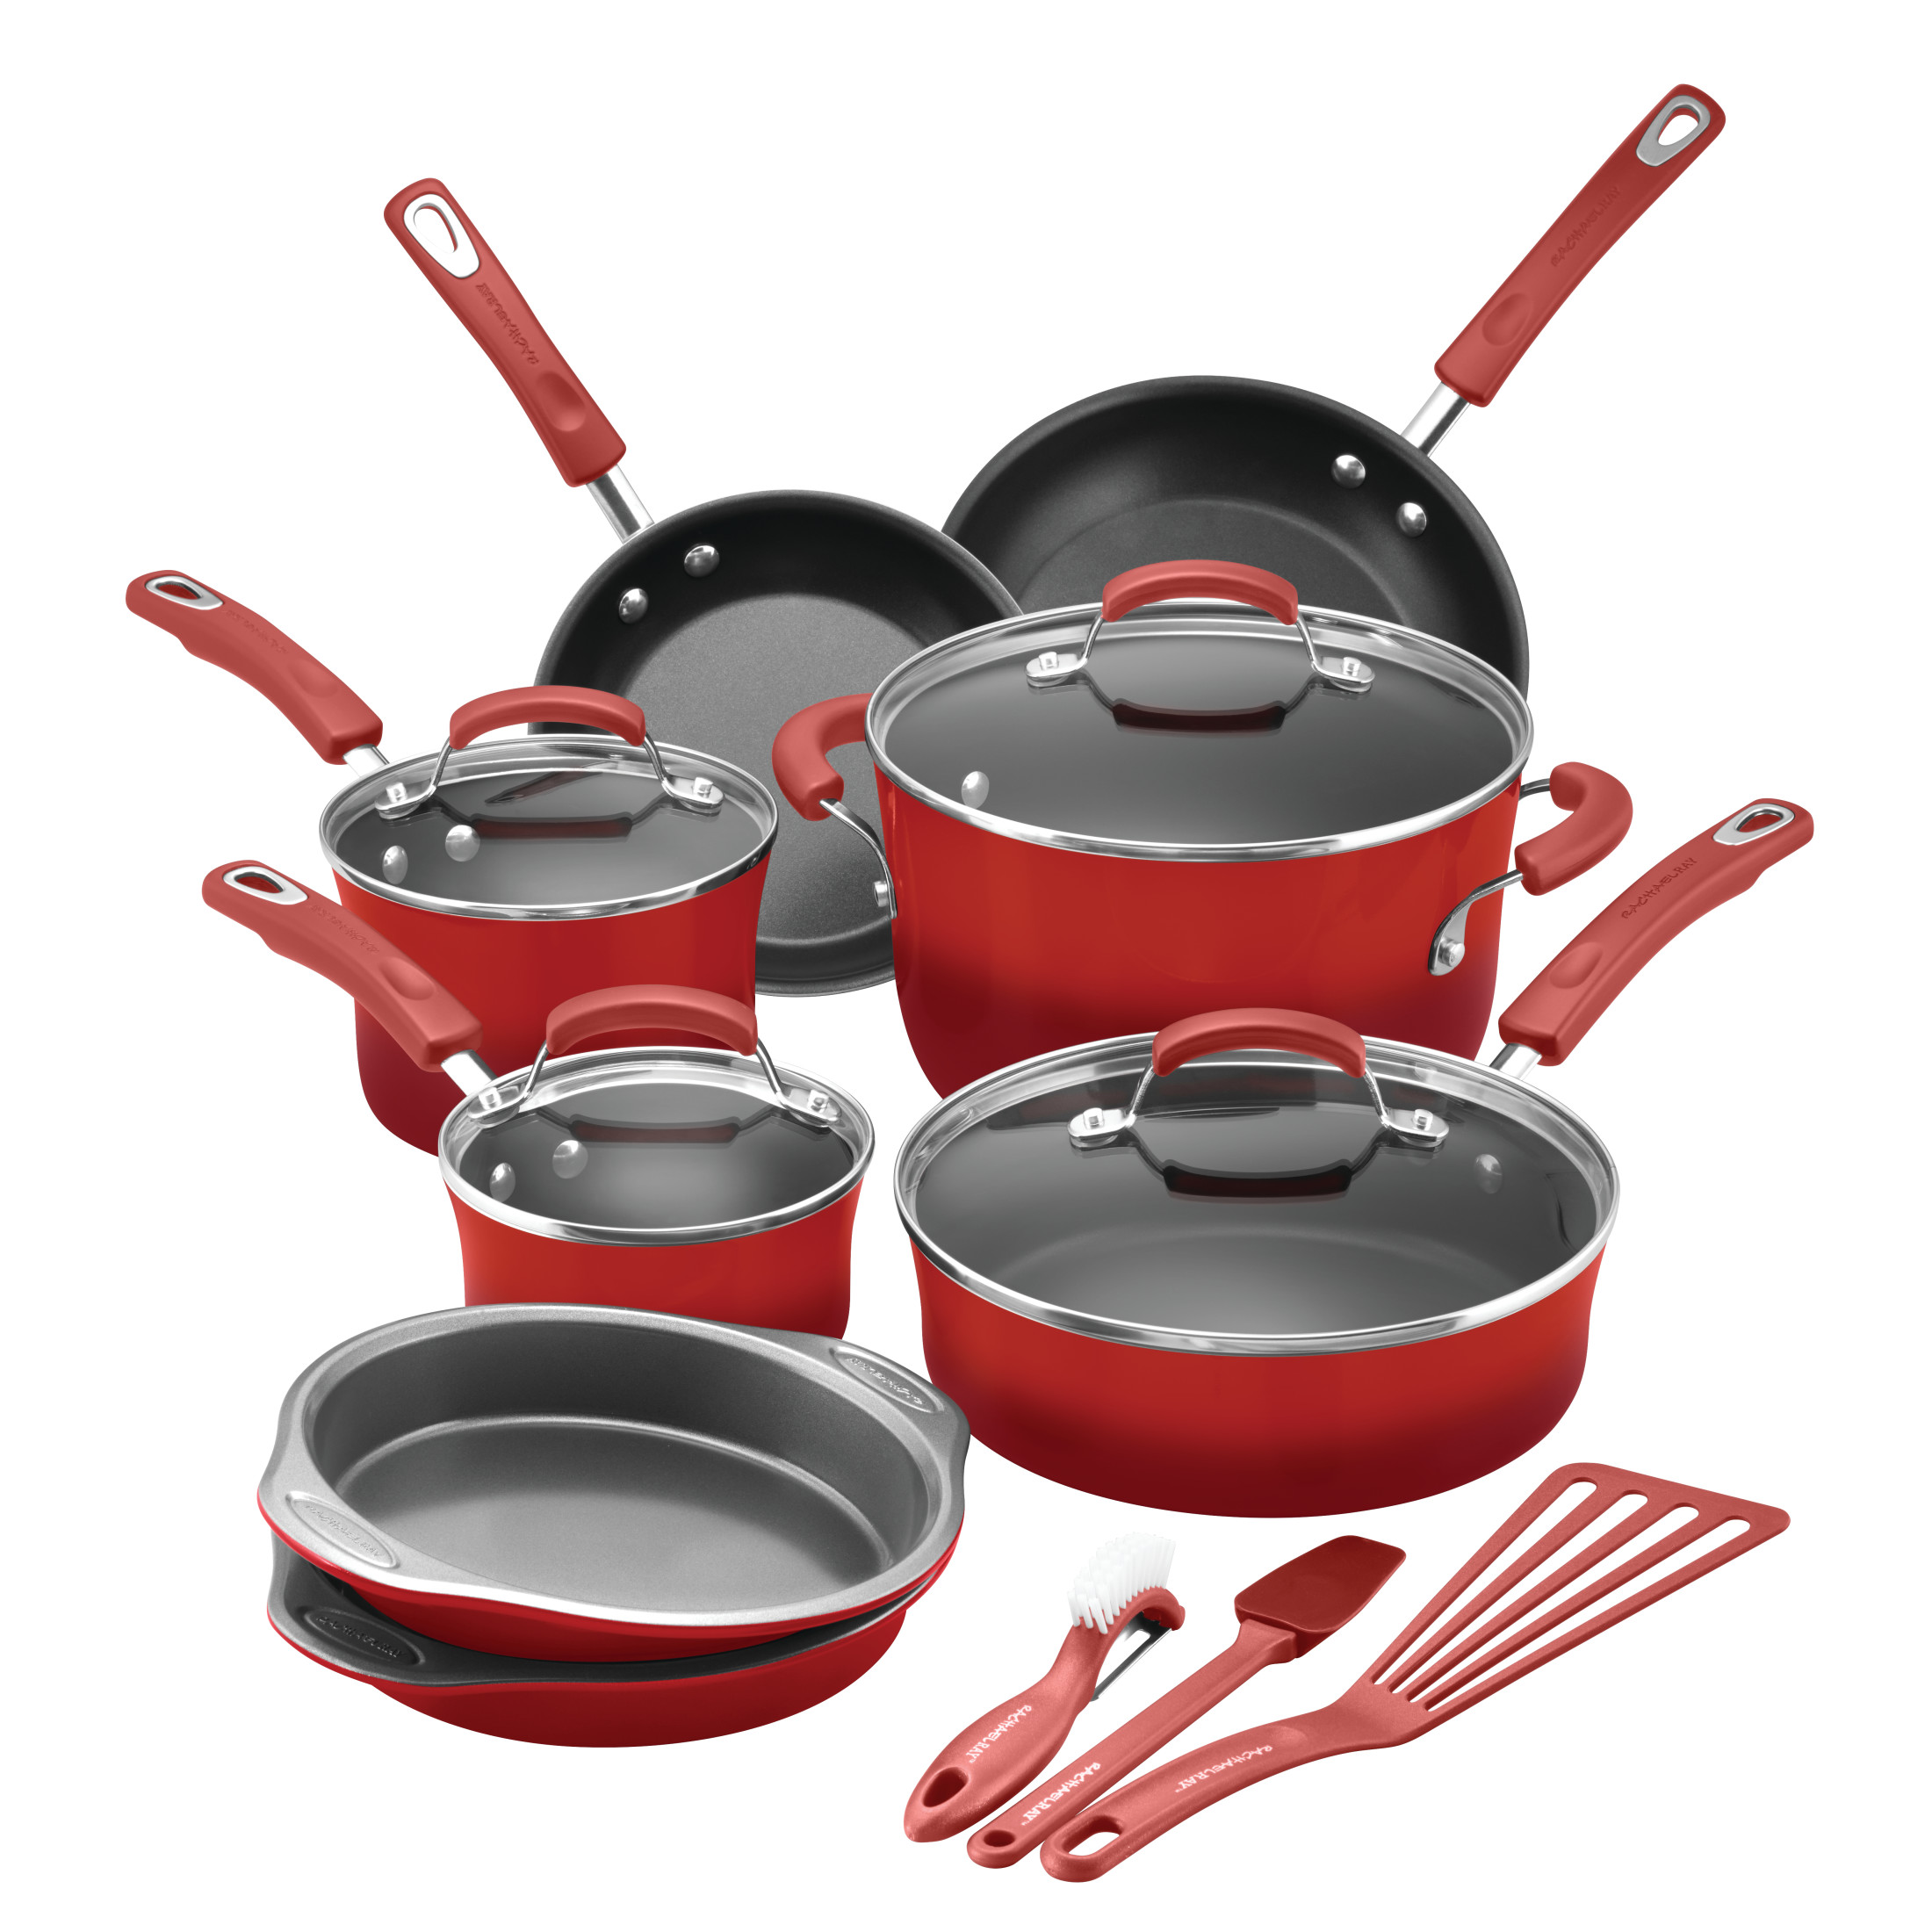 Rachael Ray Classic Brights 15 Piece Nonstick Pots and Pans, Red Gradient - image 1 of 17